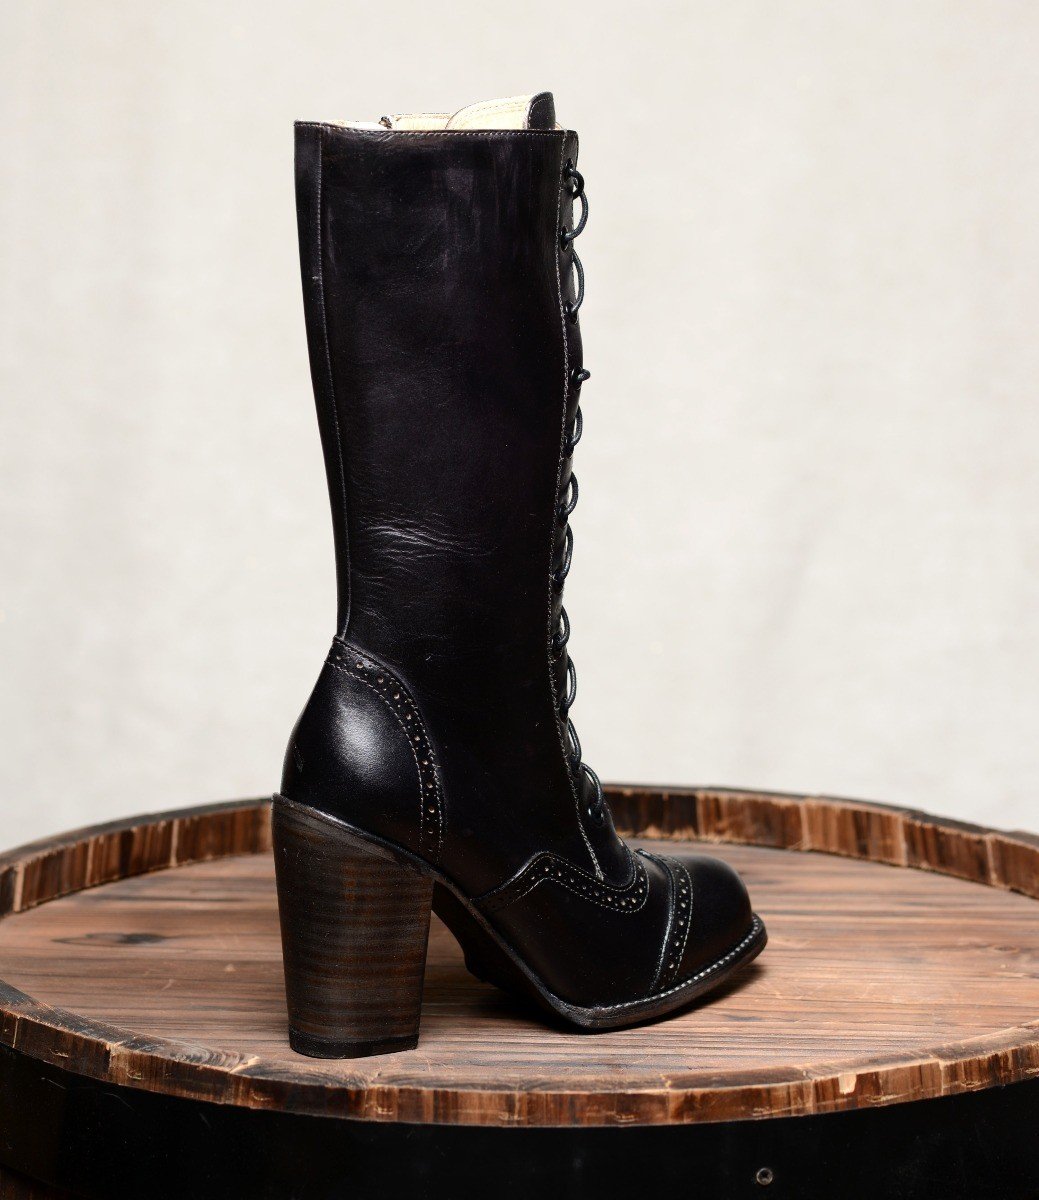 Ariana Boots in Black Rustic